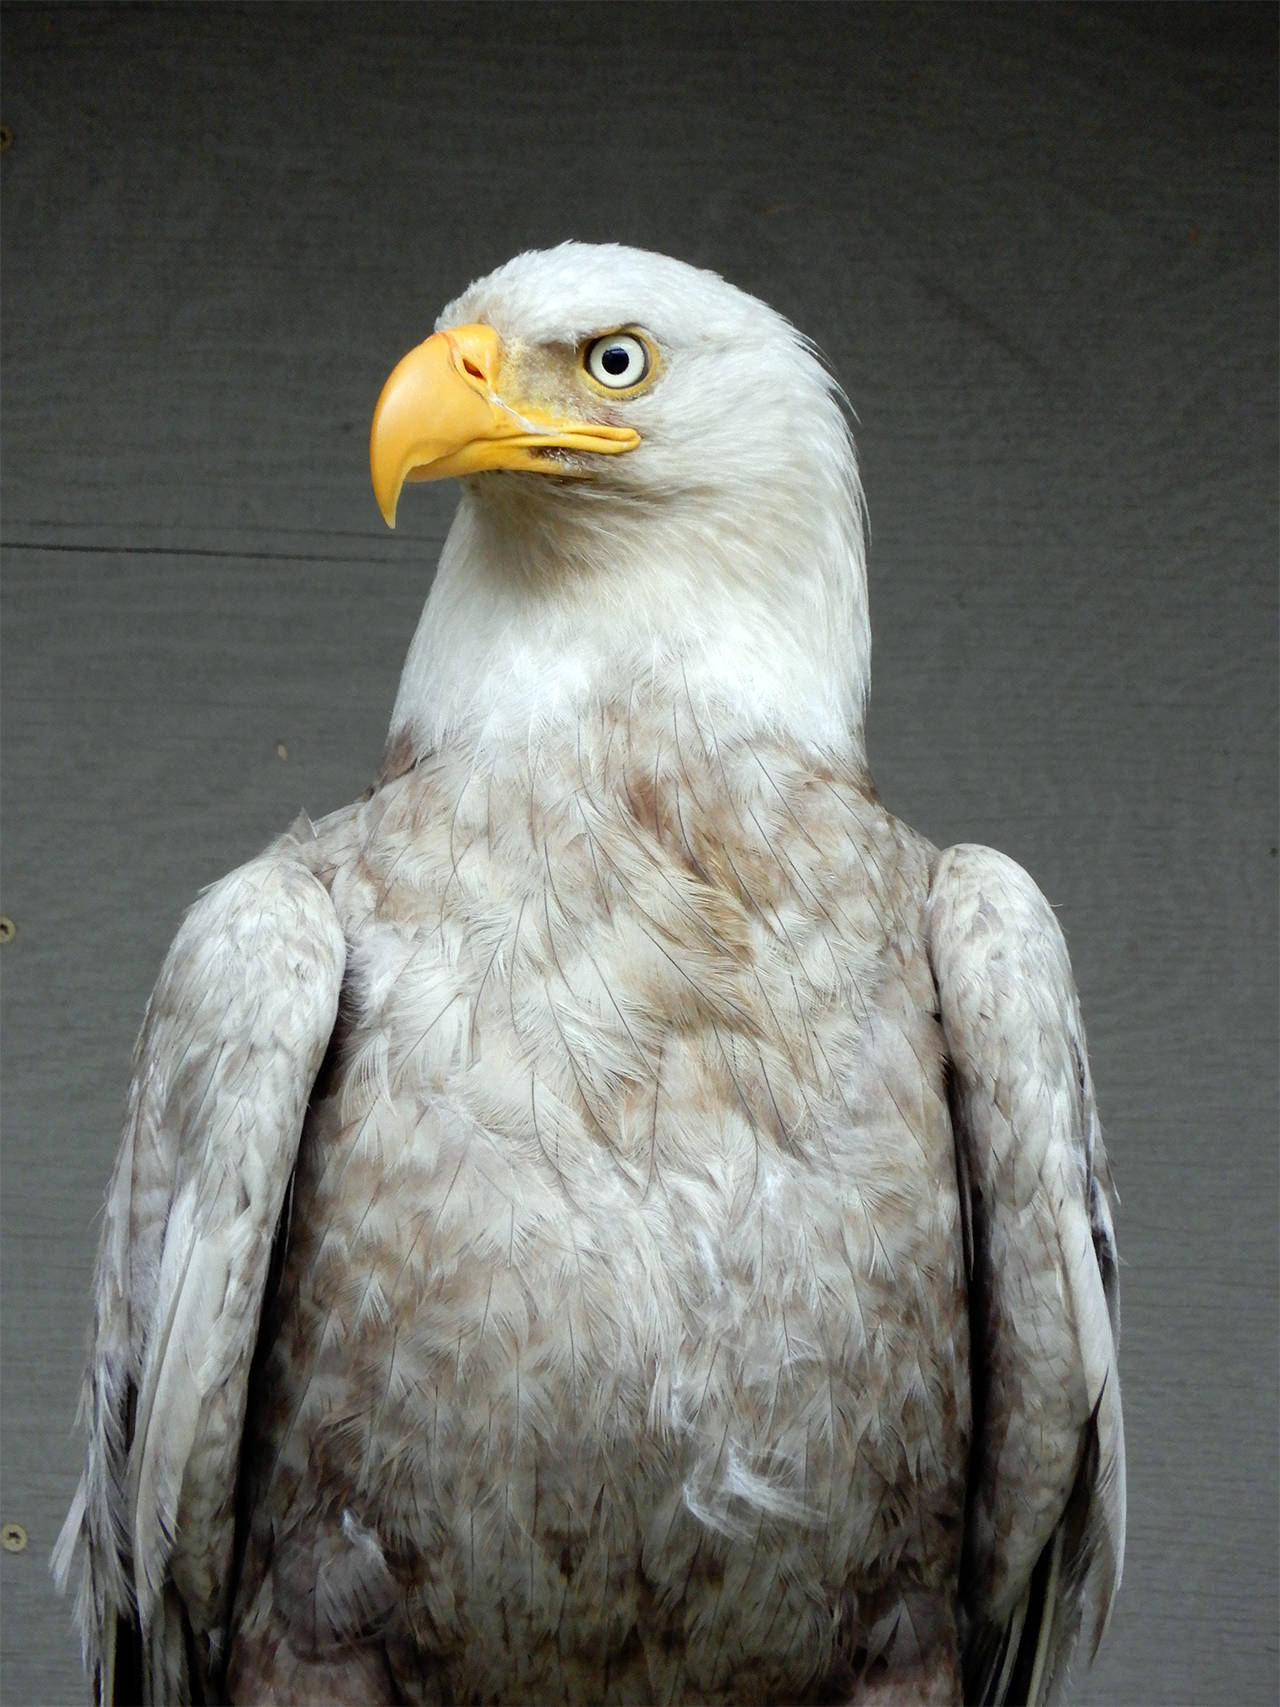 The rare leucistic bald eagle was treated by Wolf Hollow and released back into the wild. (Wolf Hollow/contributed photo)